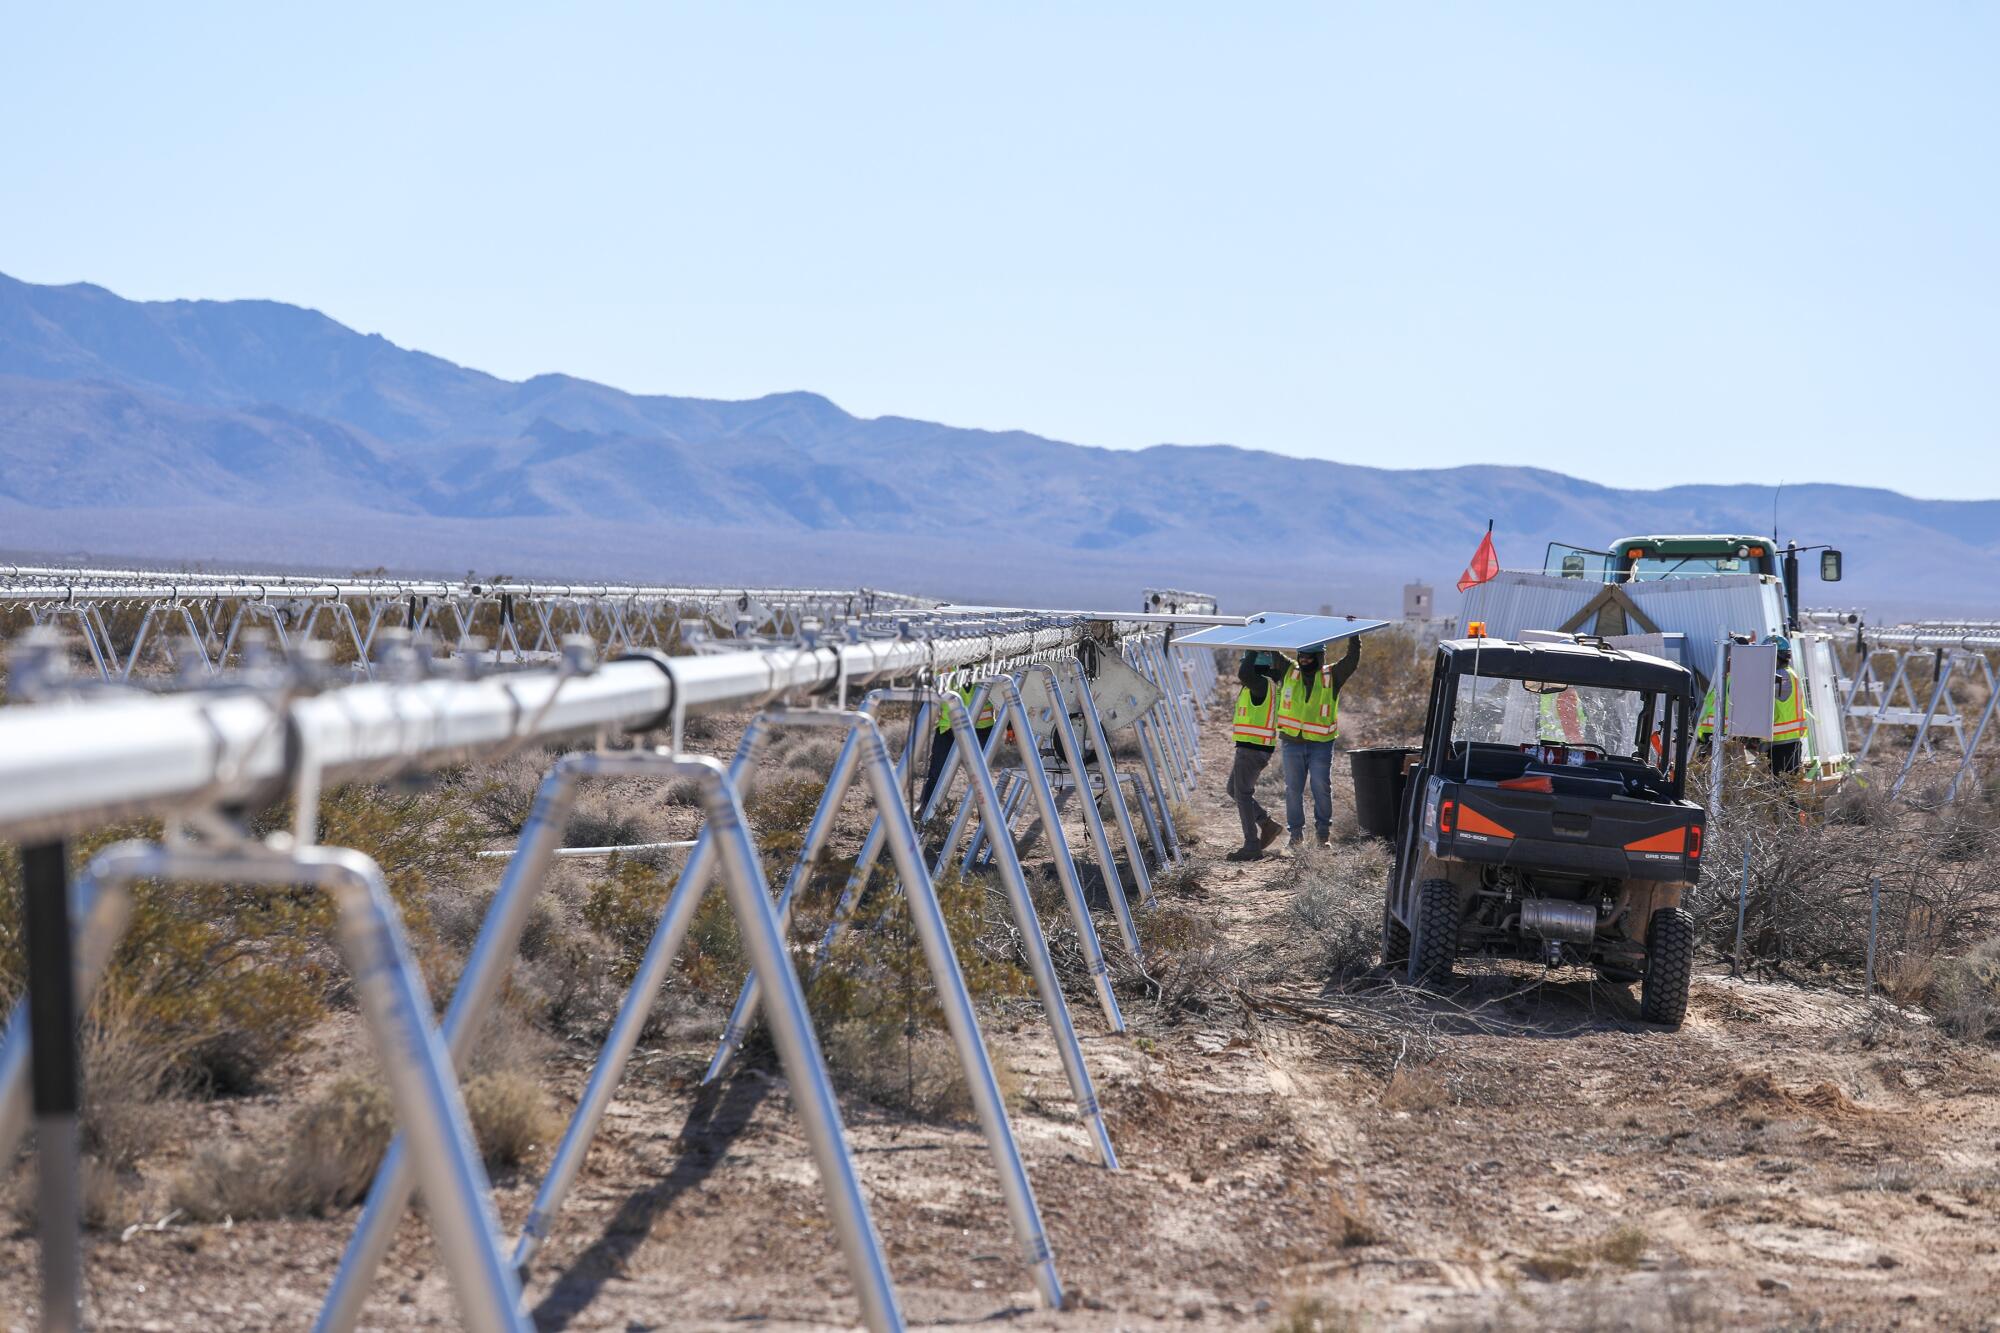 Construction workers carry photovoltaic panels for installation at the Gemini solar project in southern Nevada.